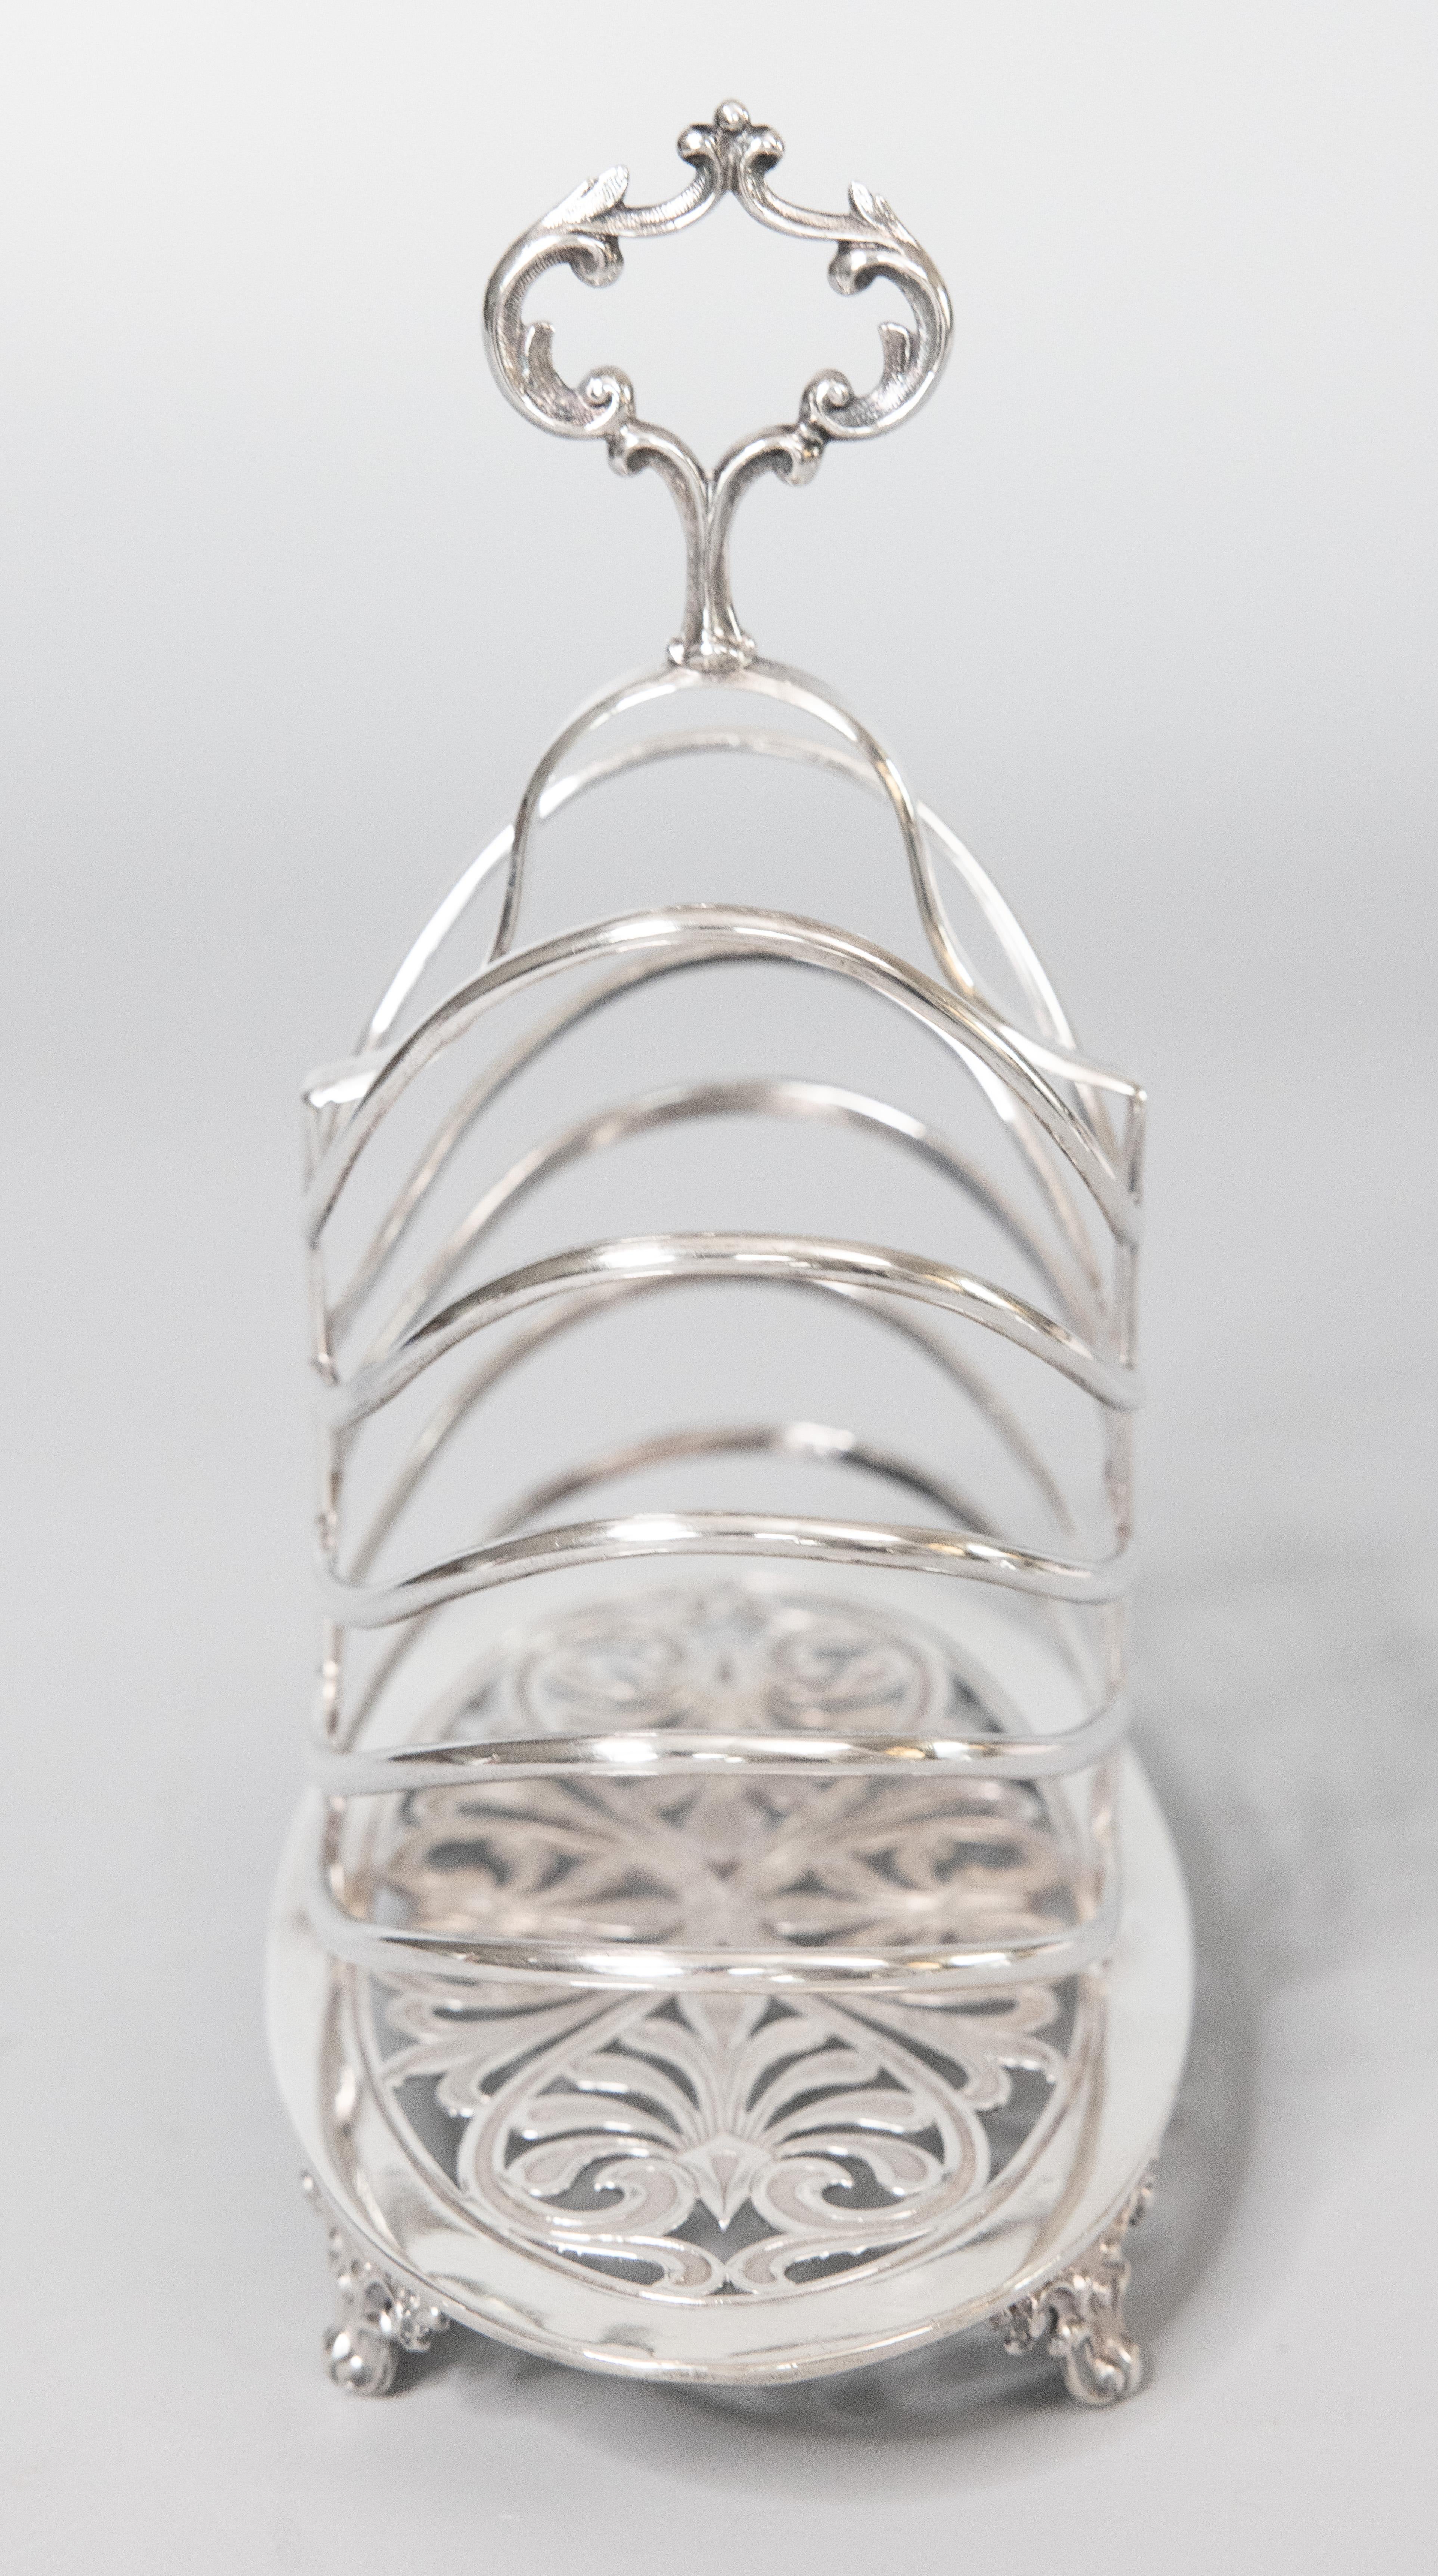 American Art Nouveau Style Reed & Barton Silver Plate Toast Rack Letter Holder circa 1930